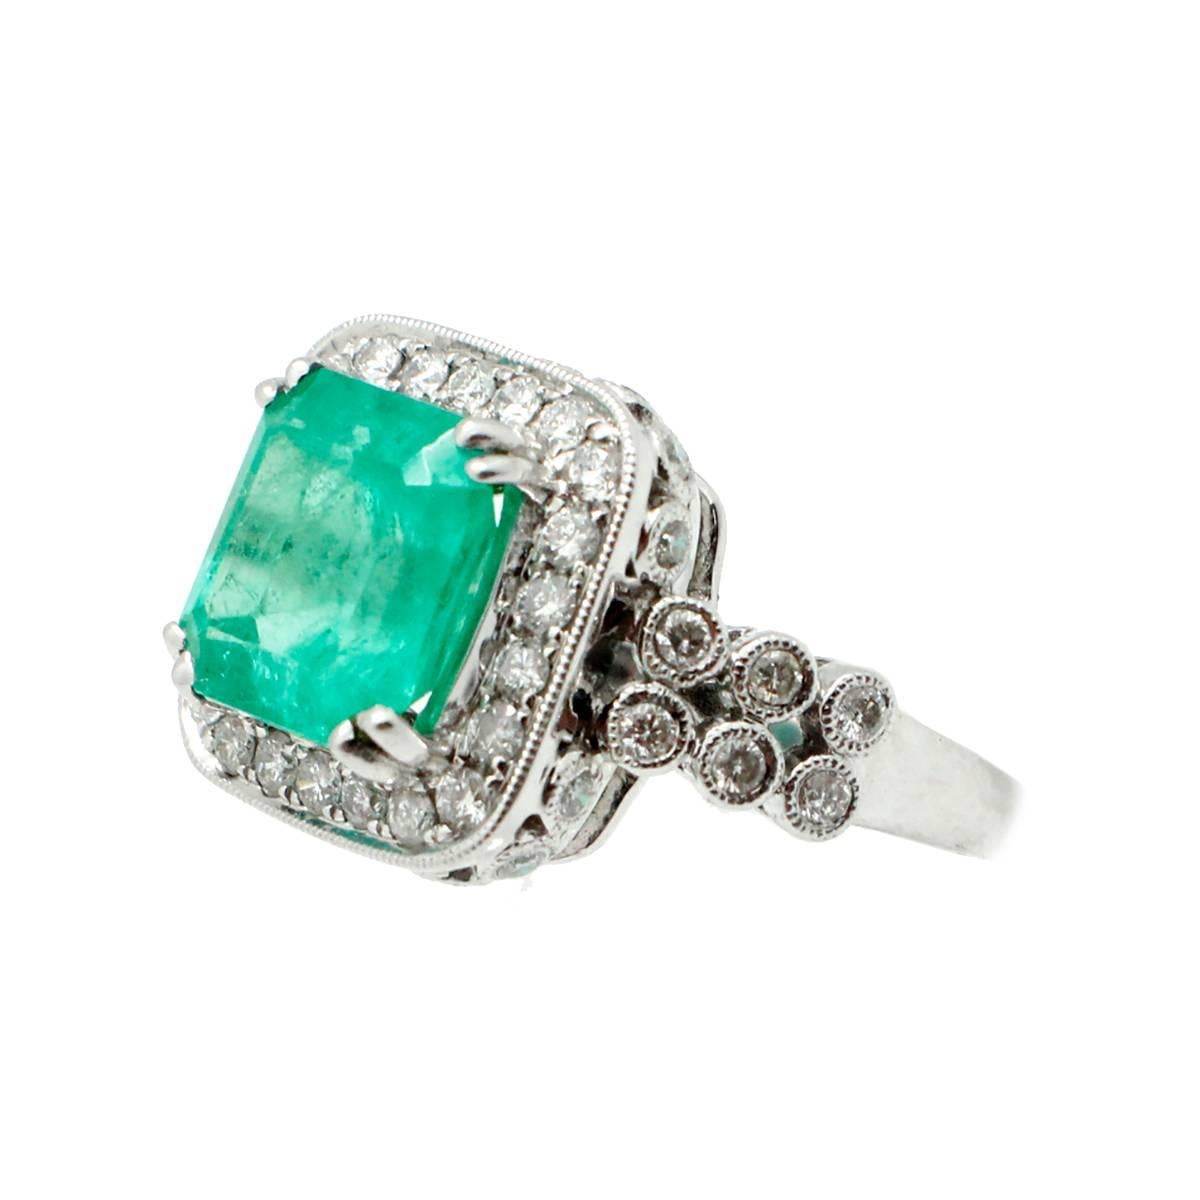 This gorgeous ring features a center stone emerald weighing approximately 4.13 carats. Surrounded by a capturing halo of round brilliant diamonds for an additional weight of 1.50 carats. The diamonds are graded H in color and VS in clarity. Hand